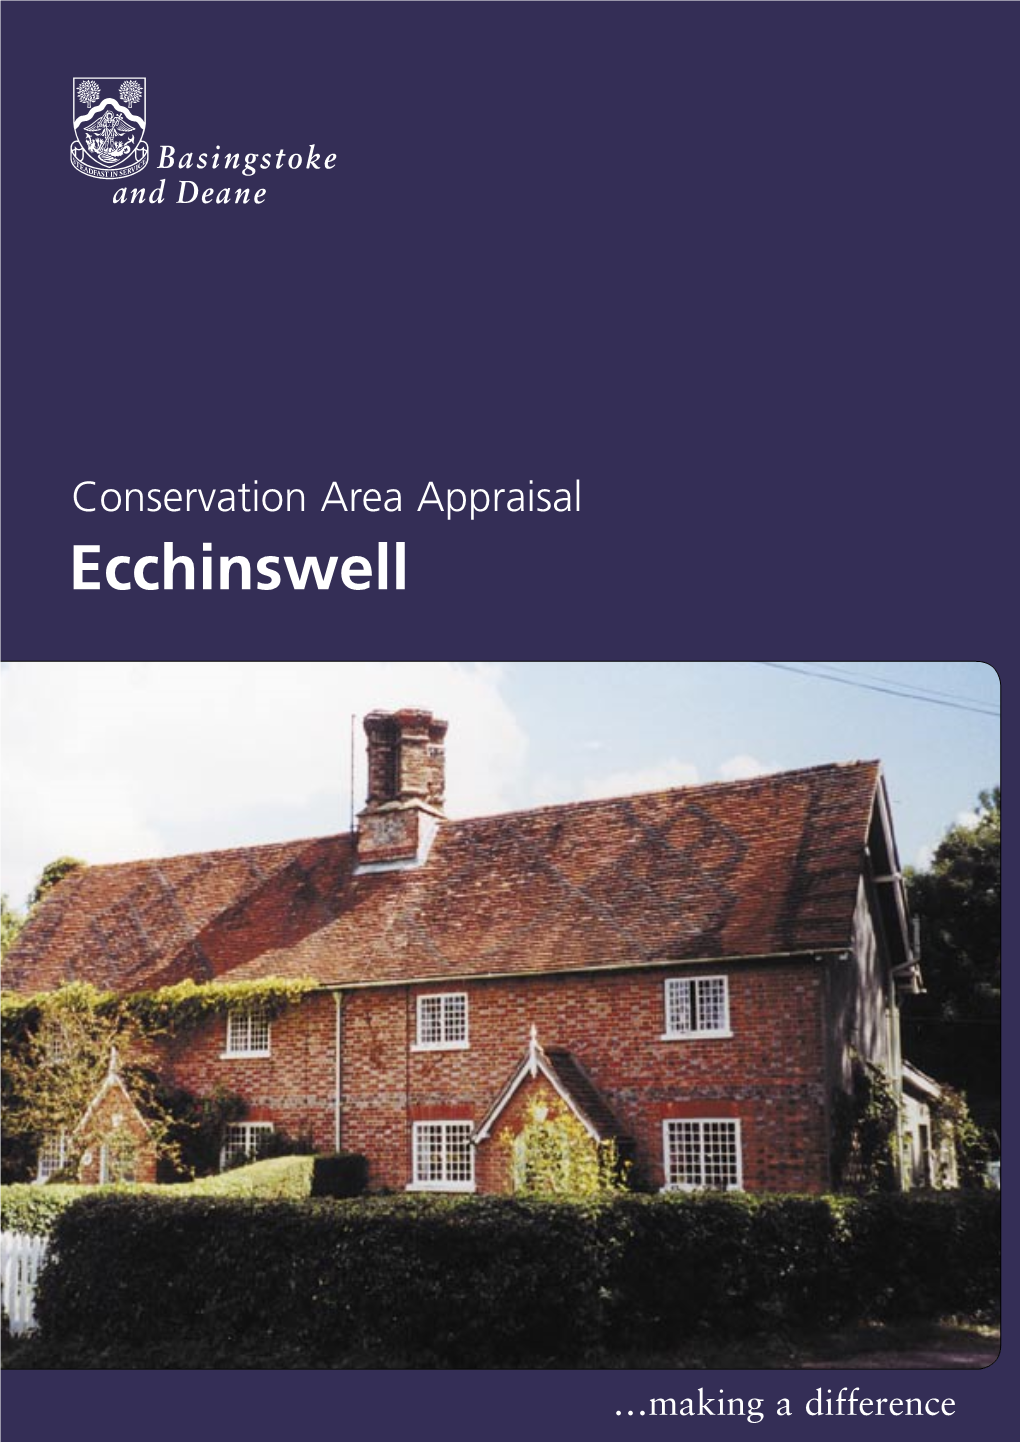 Ecchinswell Conservation Area Appraisal